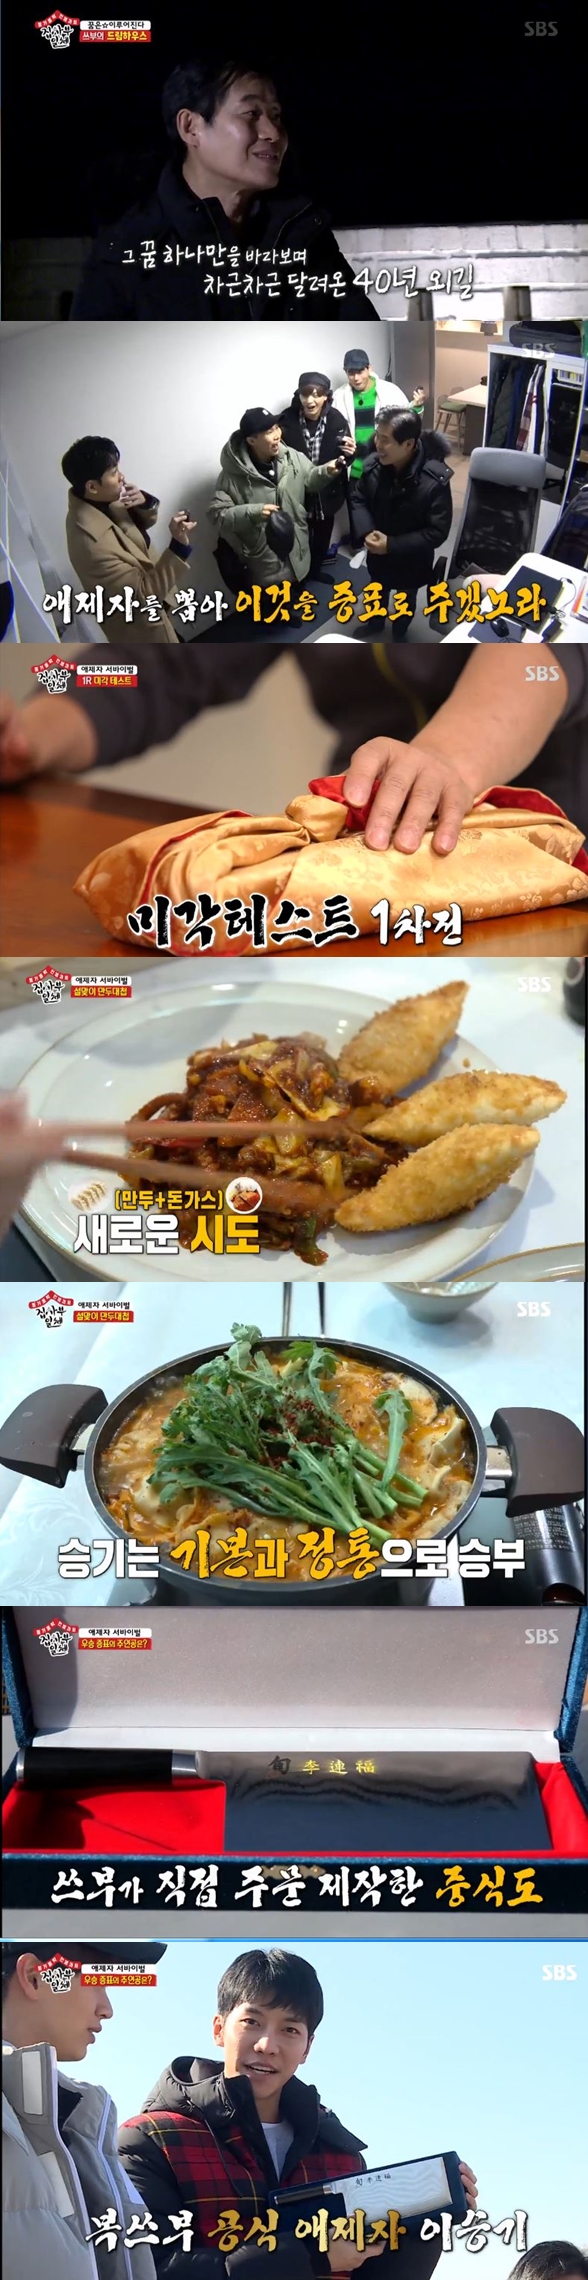 Lee Seung-gi has been named as the favorite to Lee Yeon-bok.In the SBS entertainment program All The Butlers broadcasted on the afternoon of the 3rd, Master Lee Yeon-bok directly selected the members.There were three masters who came to the restaurant at the invitation of Master Lee Yeon-bok and members.Jeon In-kwon, Kim Soo-mi, and Kangsan Ega visited the restaurant and ate the food made by the members.The members confirmed that the youngest of the masters was Master in Gangsan and could not hide their nervous expression.Unlike the members concerns, however, the masters ate in a warm atmosphere; the first arriving Jeon In-kwon and Kim Soo-mi were busy praising each other.Its really beautiful to see, said Jeon In-kwon, confessing to being a fan of Kim Soo-mi.He first met Kim Soo-mi, who resembled his mother, but showed a sense of intimacy. Kim Soo-mi also replied, I envy you more than I thought.The members showed their cooking skills learned directly from Master Lee Yeon-bok for the past masters.The members made their food at The Kitchen with their sincerity and treated them to the masters. After the cooking, Lee Yeon-bok thanked the masters who came to the restaurant.Lee Yeon-bok, who had no master in his life, expressed his gratitude, saying, I am grateful that I can treat you like this.The dining room was cheerful with a warm holiday atmosphere; Jeon In-kwon prepared a cewdish for the members; the members bowed to the four masters and thanked them.Yang Se-hyeong said he received the money in 15 years and vowed that he would not spend this money for the rest of his life.Kim Soo-mi, who watched this, said, I do not know how much money is, but it is good to have a holiday atmosphere in itself.Kim Soo-mi also presented the members with a gift. She presented the members with a handkerchief and Kim Soo-mis cookbook, saying, I prepared a gift for your mothers.In particular, Yang Se-hyeongs mother gave a great impression to Yang Se-hyeong by writing a letter to her to take care of her health.Kim Soo-mi left first after giving gifts to members on a live schedule.The atmosphere of the restaurant sank sharply as Kim Soo-mi, who had made the atmosphere cheerful, left, and the members gathered at The Kitchen to discuss ways to bring the atmosphere back.Lee Seung-gi suggested, Lets go game with the masters to make dishes.The members who returned to the table suggested that the quiet masters team up and play Game, and the masters readily accepted the proposal.The simple game started, and the atmosphere of the restaurant got hot again: Lee Seung-gi was teamed up as a master and a student to start a simple telepathic game.In particular, Jeon In-kwon gave a big smile with Yang Se-hyeong and dissonance.Jeon In-kwon continued to find the Noorungji even when he came to the restaurant, but he did not choose Noorungji in Talepa City and lost in Game.As the atmosphere grew ripe, Lee Seung-gi proposed a frying fan game that was upgrading one step.Yang Se-hyeong was worried about not being difficult when he saw masters who did not easily do simple Game, but three masters easily adapted to Game.After an unexpectedly intense match, Jeon In-kwon was wrong, and Yang Se-hyeong was washing dishes.Yang Se-hyeong laughed, saying, Its okay because the master is happy. After the game, the masters left with gratitude to the members, saying, I laugh a lot for a long time.After serving the masters, Lee took the members to his home. Lee Yeon-boks house was his dream house.The grand two-story house was a house where Lee Yeon-bok and his daughter and his wife lived together. Lee Yeon-bok introduced every corner of the house to the members, saying, It is a house that I have dreamed of for a lifetime.Lee Yeon-bok declared that he would select the disciples among the members. Lee Yeon-bok took out valuable items from the safe and said, I will select the disciples through some tests.The members burned their enthusiasm, saying, I will never miss this. The mission to pick the disciple was to make dumplings.The members made dumplings with octopus, a special menu prepared by Lee Yeon-bok in their own style. Lee Yeon-bok invited Kim Poong, Jang Yuan, and Michelin One Star chef to evaluate the members dumplings.Yang Se-hyeong made fishing fried and dumpling gas, while Lee Seung-gi made a dumpling goal.Both of their food received praise, but Lee Seung-gis dumplings, which made use of the 40-year-old taste, became the final winner.Lee Seung-gi was chosen as Lee Yeon-boks favorite, and received a Chinese esophagus from him.